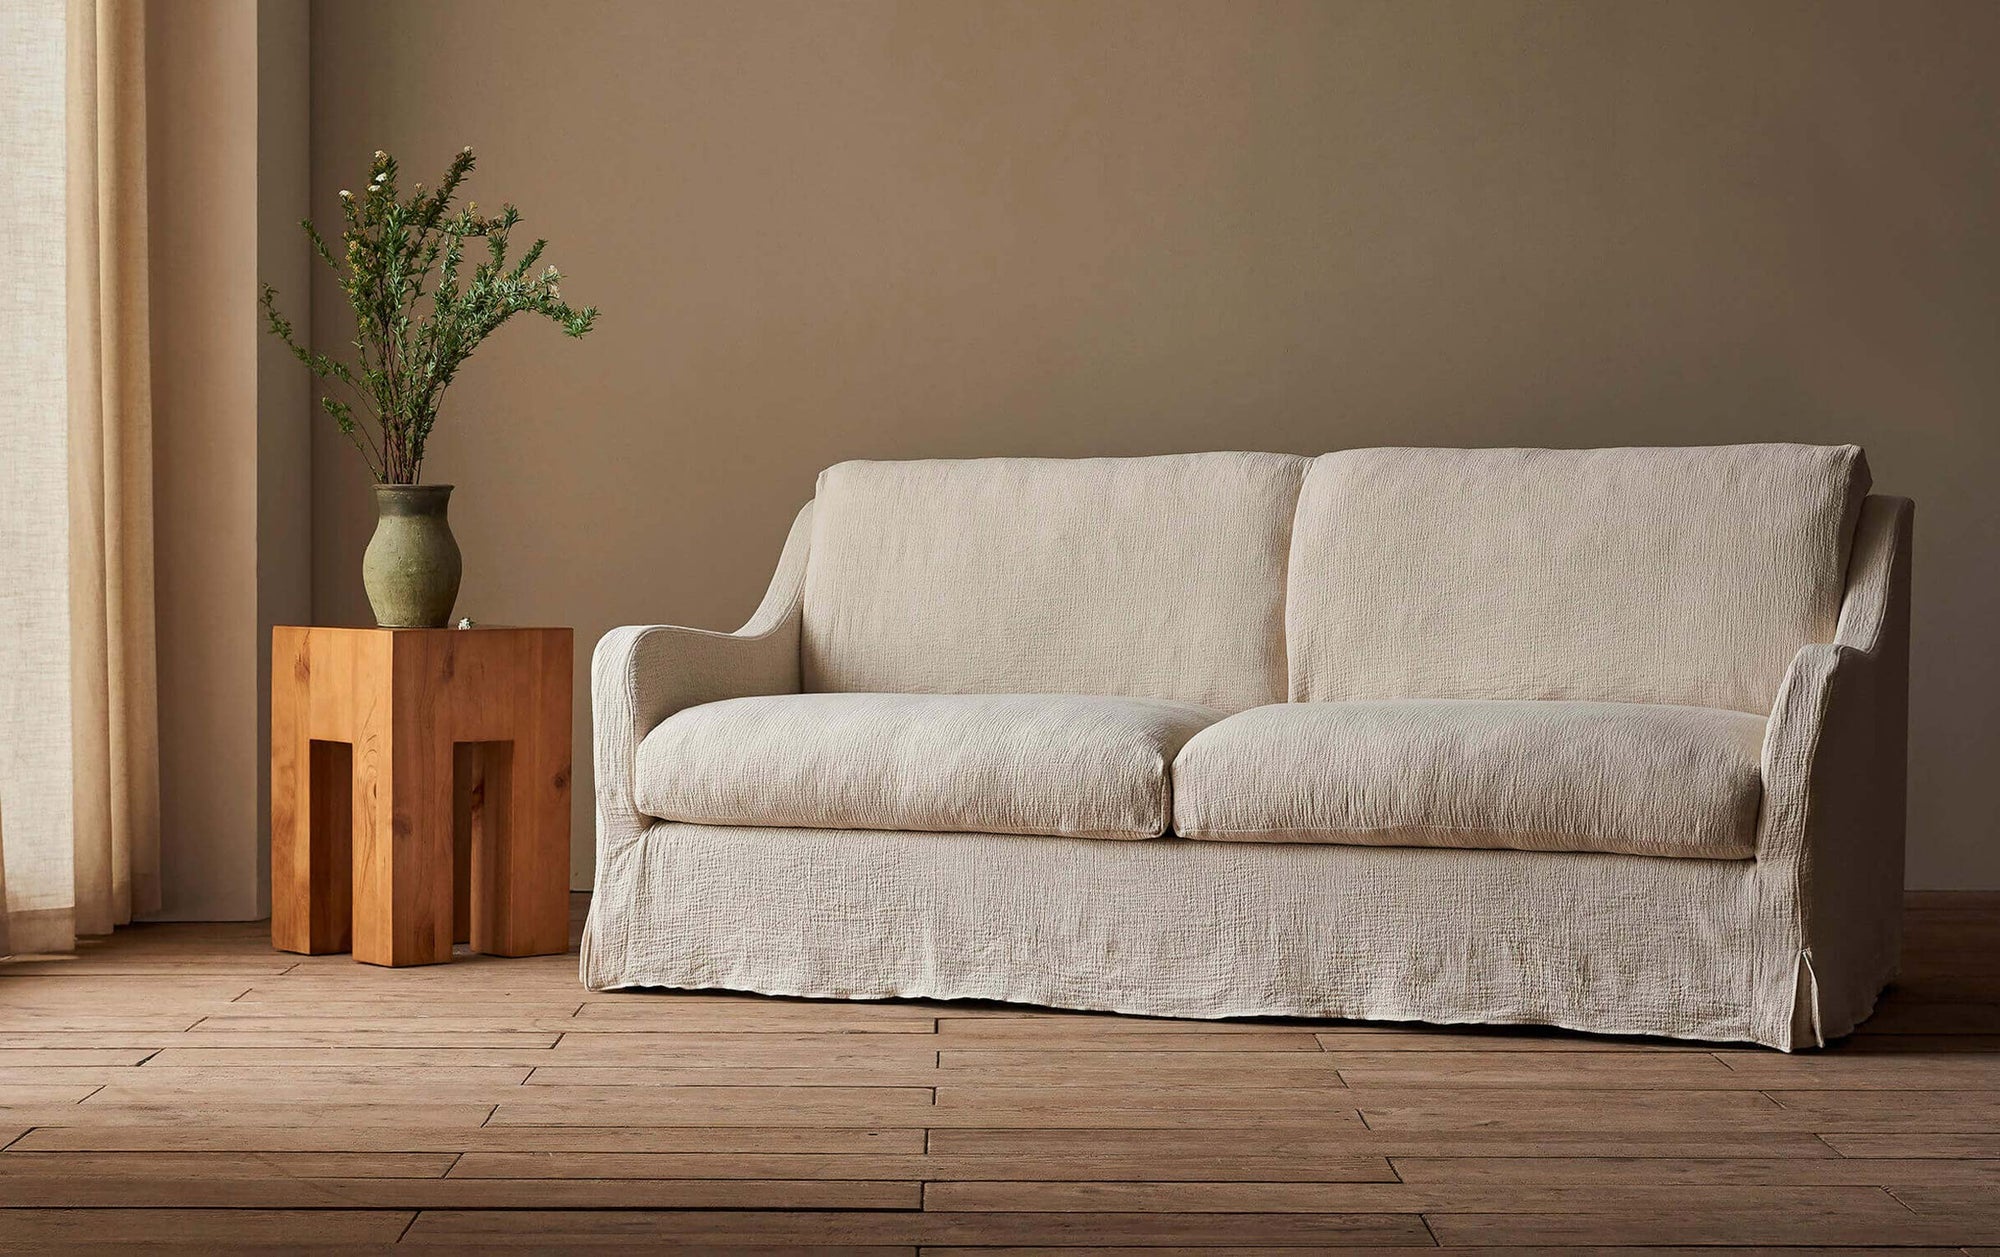 Esmé 84" Sofa in Jasmine Rice, a light warm greige Medium Weight Linen, next to a wooden side table decorated with a plant